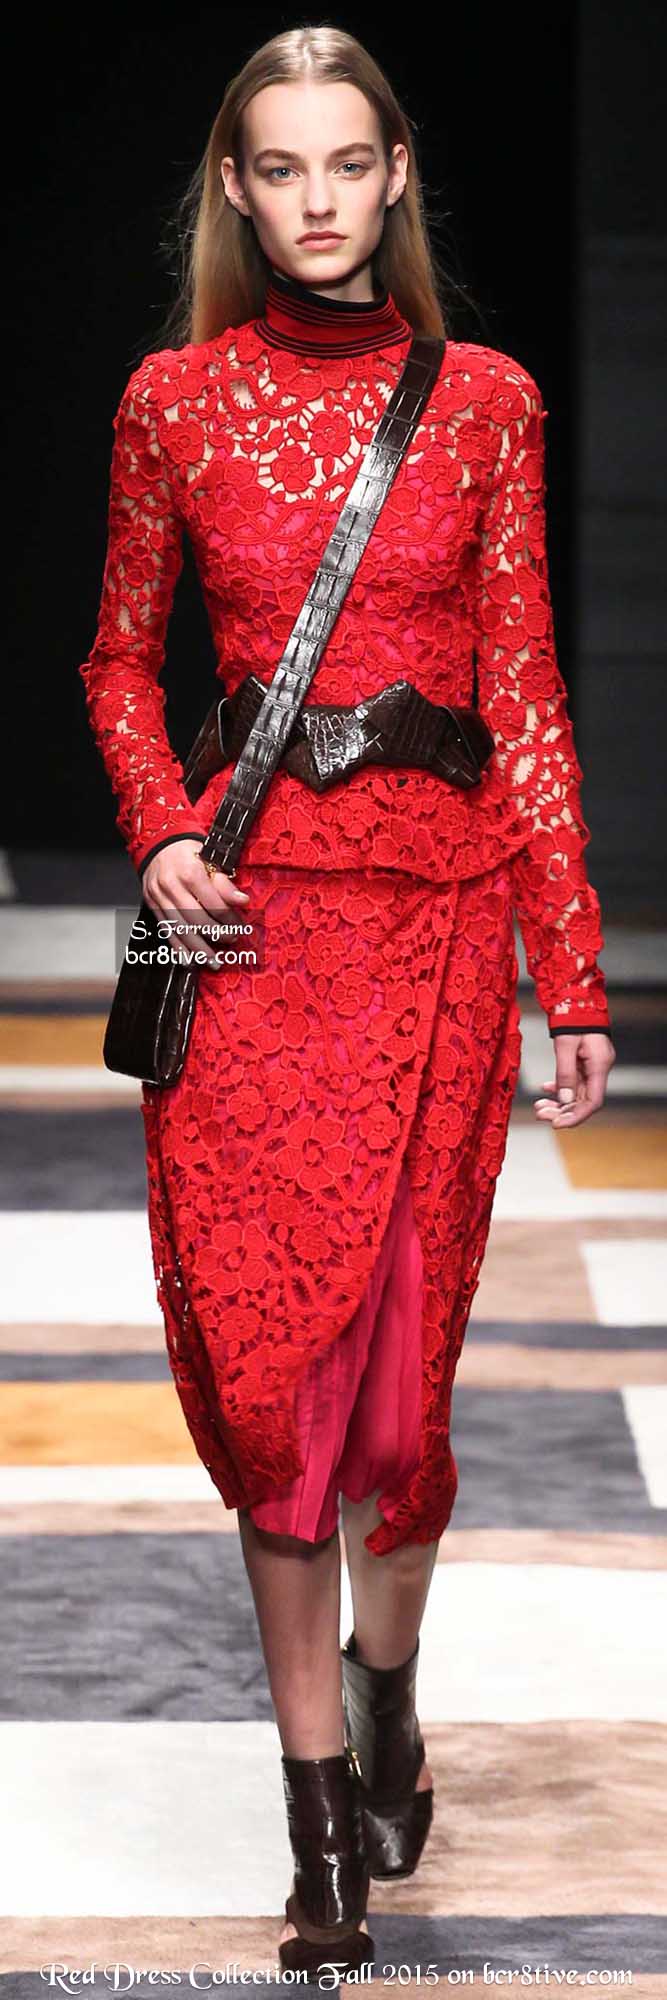 Red Dress Collection Fall 2015 – Be Creative